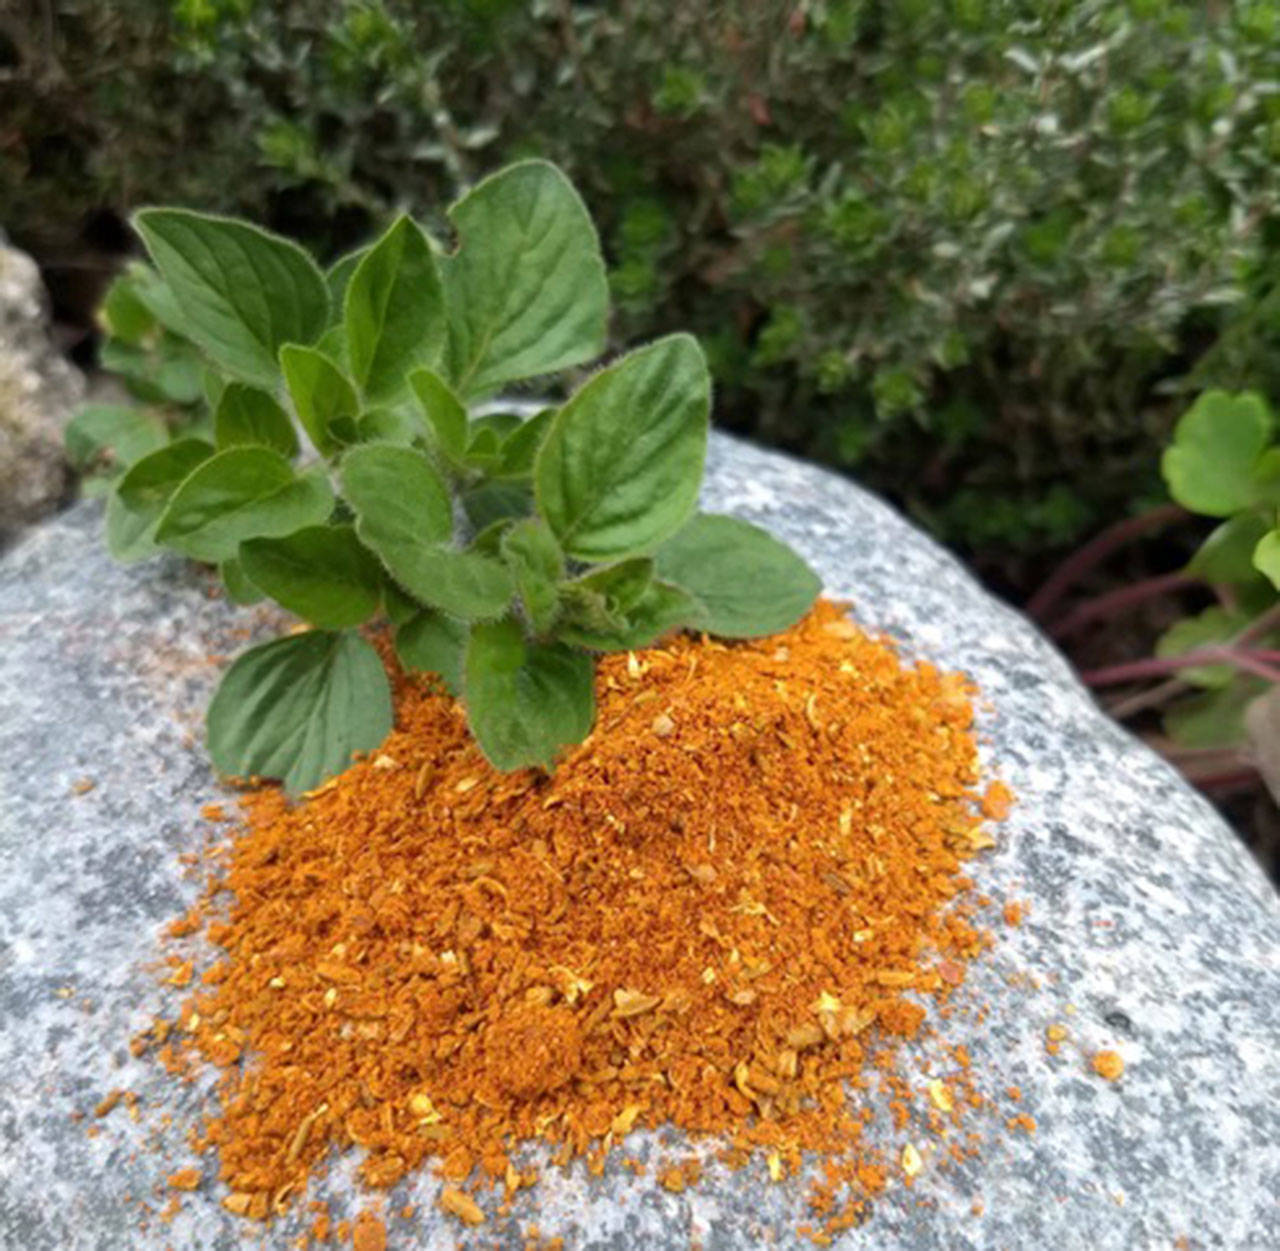 The Moroccan spice blend with oregano is ready to add more flavor to meals. (Betsy Wharton/for Peninsula Daily News)